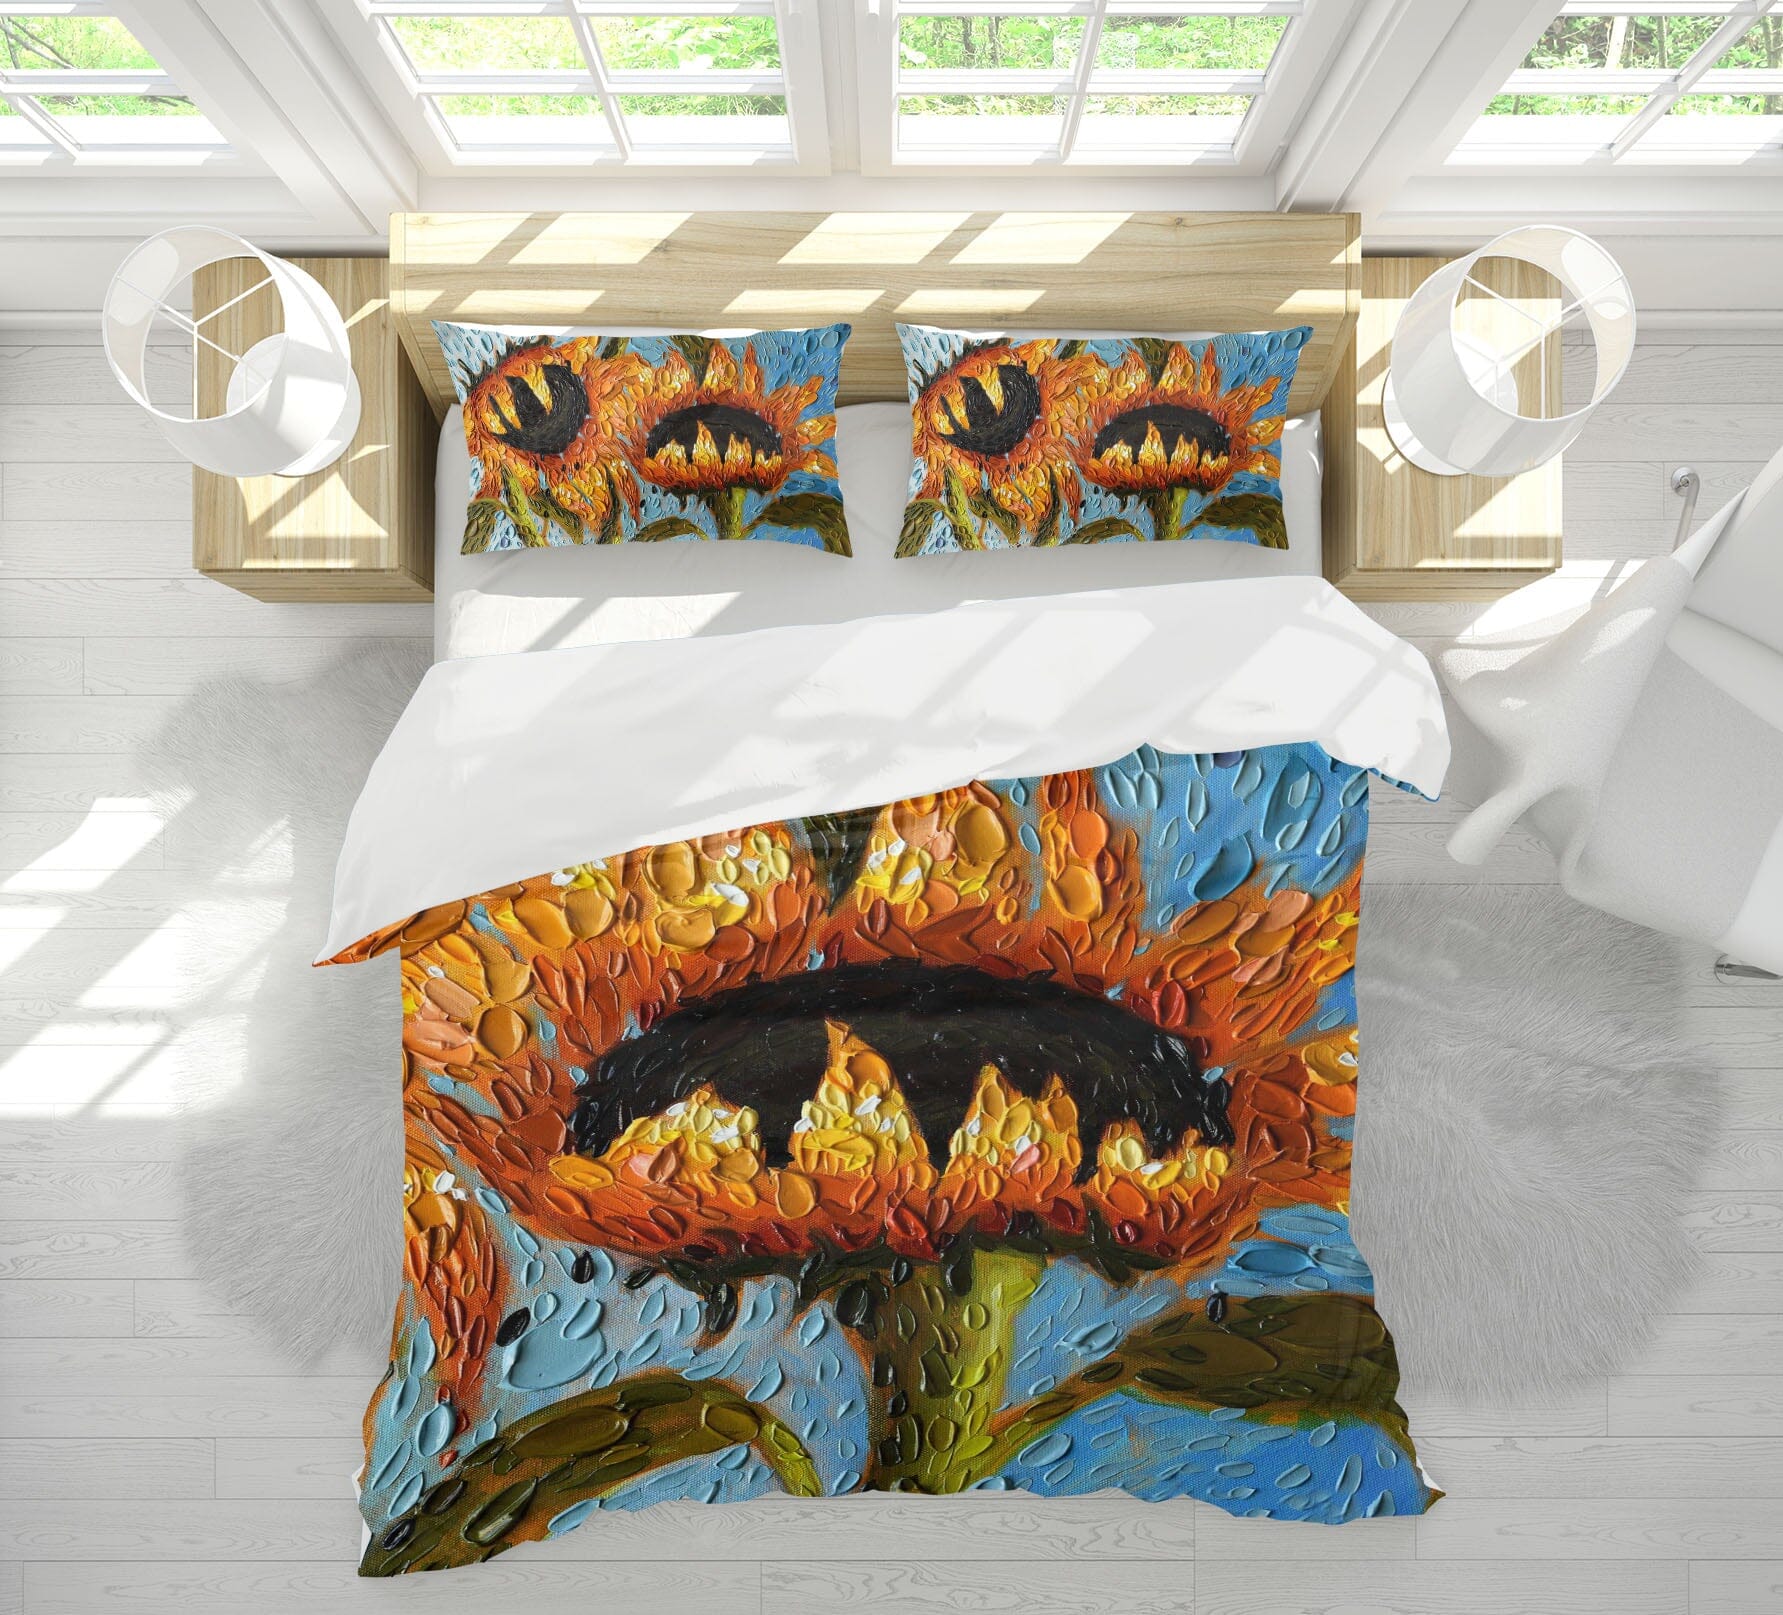 3D Serenity Sunflowers 2118 Dena Tollefson bedding Bed Pillowcases Quilt Quiet Covers AJ Creativity Home 